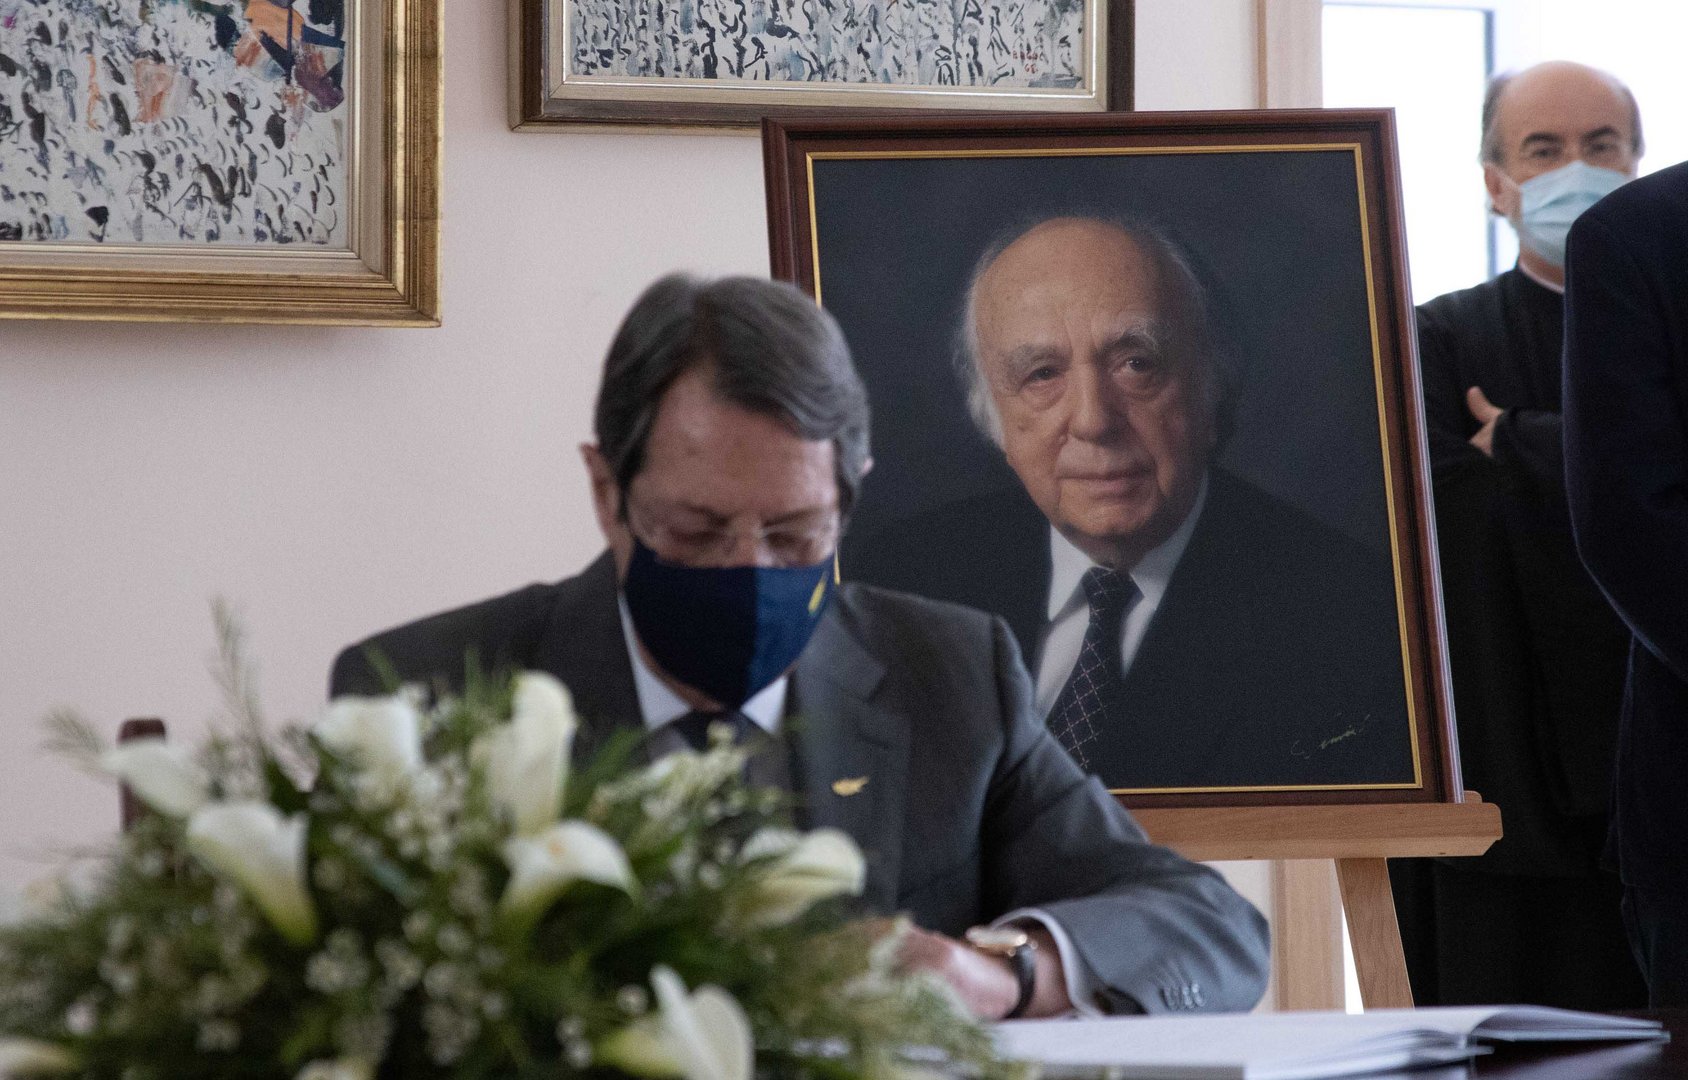 image Anastasiades pays tribute to Lyssarides on signing condolence book